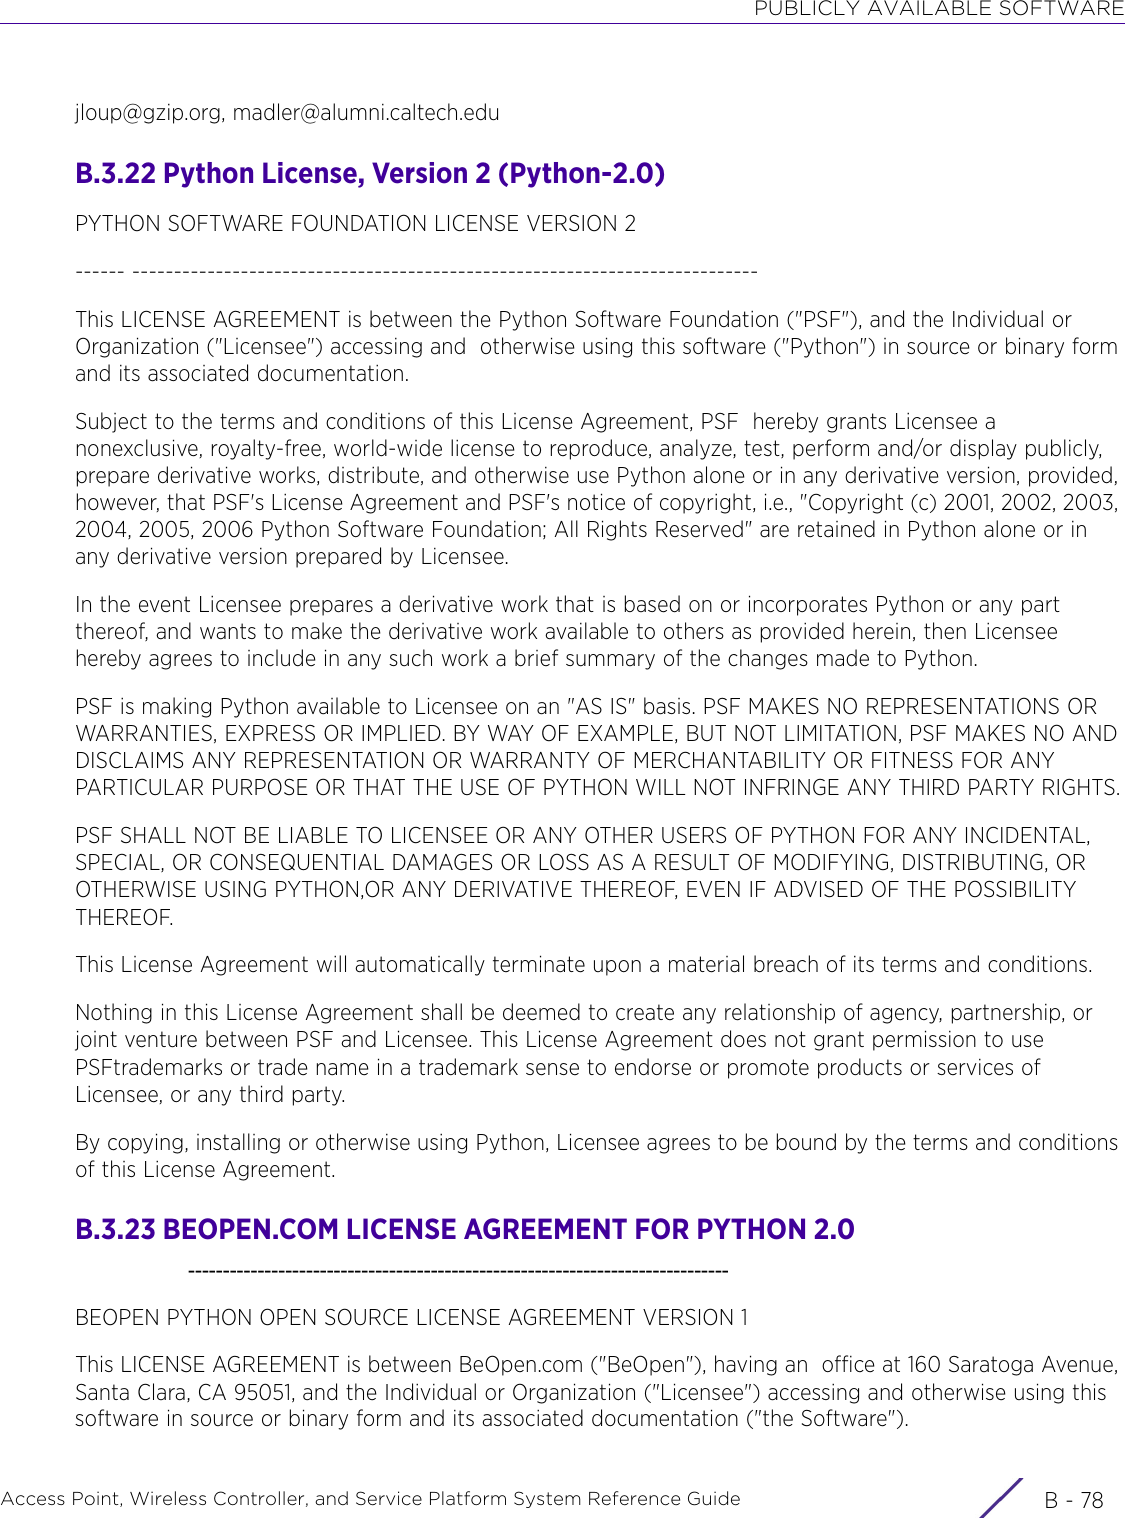 PUBLICLY AVAILABLE SOFTWAREAccess Point, Wireless Controller, and Service Platform System Reference Guide  B - 78jloup@gzip.org, madler@alumni.caltech.edu B.3.22 Python License, Version 2 (Python-2.0)PYTHON SOFTWARE FOUNDATION LICENSE VERSION 2------ ---------------------------------------------------------------------------This LICENSE AGREEMENT is between the Python Software Foundation (&quot;PSF&quot;), and the Individual or Organization (&quot;Licensee&quot;) accessing and  otherwise using this software (&quot;Python&quot;) in source or binary form and its associated documentation. Subject to the terms and conditions of this License Agreement, PSF  hereby grants Licensee a nonexclusive, royalty-free, world-wide license to reproduce, analyze, test, perform and/or display publicly, prepare derivative works, distribute, and otherwise use Python alone or in any derivative version, provided, however, that PSF&apos;s License Agreement and PSF&apos;s notice of copyright, i.e., &quot;Copyright (c) 2001, 2002, 2003, 2004, 2005, 2006 Python Software Foundation; All Rights Reserved&quot; are retained in Python alone or in any derivative version prepared by Licensee.In the event Licensee prepares a derivative work that is based on or incorporates Python or any part thereof, and wants to make the derivative work available to others as provided herein, then Licensee hereby agrees to include in any such work a brief summary of the changes made to Python.PSF is making Python available to Licensee on an &quot;AS IS&quot; basis. PSF MAKES NO REPRESENTATIONS OR WARRANTIES, EXPRESS OR IMPLIED. BY WAY OF EXAMPLE, BUT NOT LIMITATION, PSF MAKES NO AND DISCLAIMS ANY REPRESENTATION OR WARRANTY OF MERCHANTABILITY OR FITNESS FOR ANY PARTICULAR PURPOSE OR THAT THE USE OF PYTHON WILL NOT INFRINGE ANY THIRD PARTY RIGHTS.PSF SHALL NOT BE LIABLE TO LICENSEE OR ANY OTHER USERS OF PYTHON FOR ANY INCIDENTAL, SPECIAL, OR CONSEQUENTIAL DAMAGES OR LOSS AS A RESULT OF MODIFYING, DISTRIBUTING, OR OTHERWISE USING PYTHON,OR ANY DERIVATIVE THEREOF, EVEN IF ADVISED OF THE POSSIBILITY THEREOF.This License Agreement will automatically terminate upon a material breach of its terms and conditions.Nothing in this License Agreement shall be deemed to create any relationship of agency, partnership, or joint venture between PSF and Licensee. This License Agreement does not grant permission to use PSFtrademarks or trade name in a trademark sense to endorse or promote products or services of Licensee, or any third party.By copying, installing or otherwise using Python, Licensee agrees to be bound by the terms and conditions of this License Agreement.B.3.23 BEOPEN.COM LICENSE AGREEMENT FOR PYTHON 2.0    ------------------------------------------------------------------------------BEOPEN PYTHON OPEN SOURCE LICENSE AGREEMENT VERSION 1This LICENSE AGREEMENT is between BeOpen.com (&quot;BeOpen&quot;), having an  office at 160 Saratoga Avenue, Santa Clara, CA 95051, and the Individual or Organization (&quot;Licensee&quot;) accessing and otherwise using this software in source or binary form and its associated documentation (&quot;the Software&quot;).